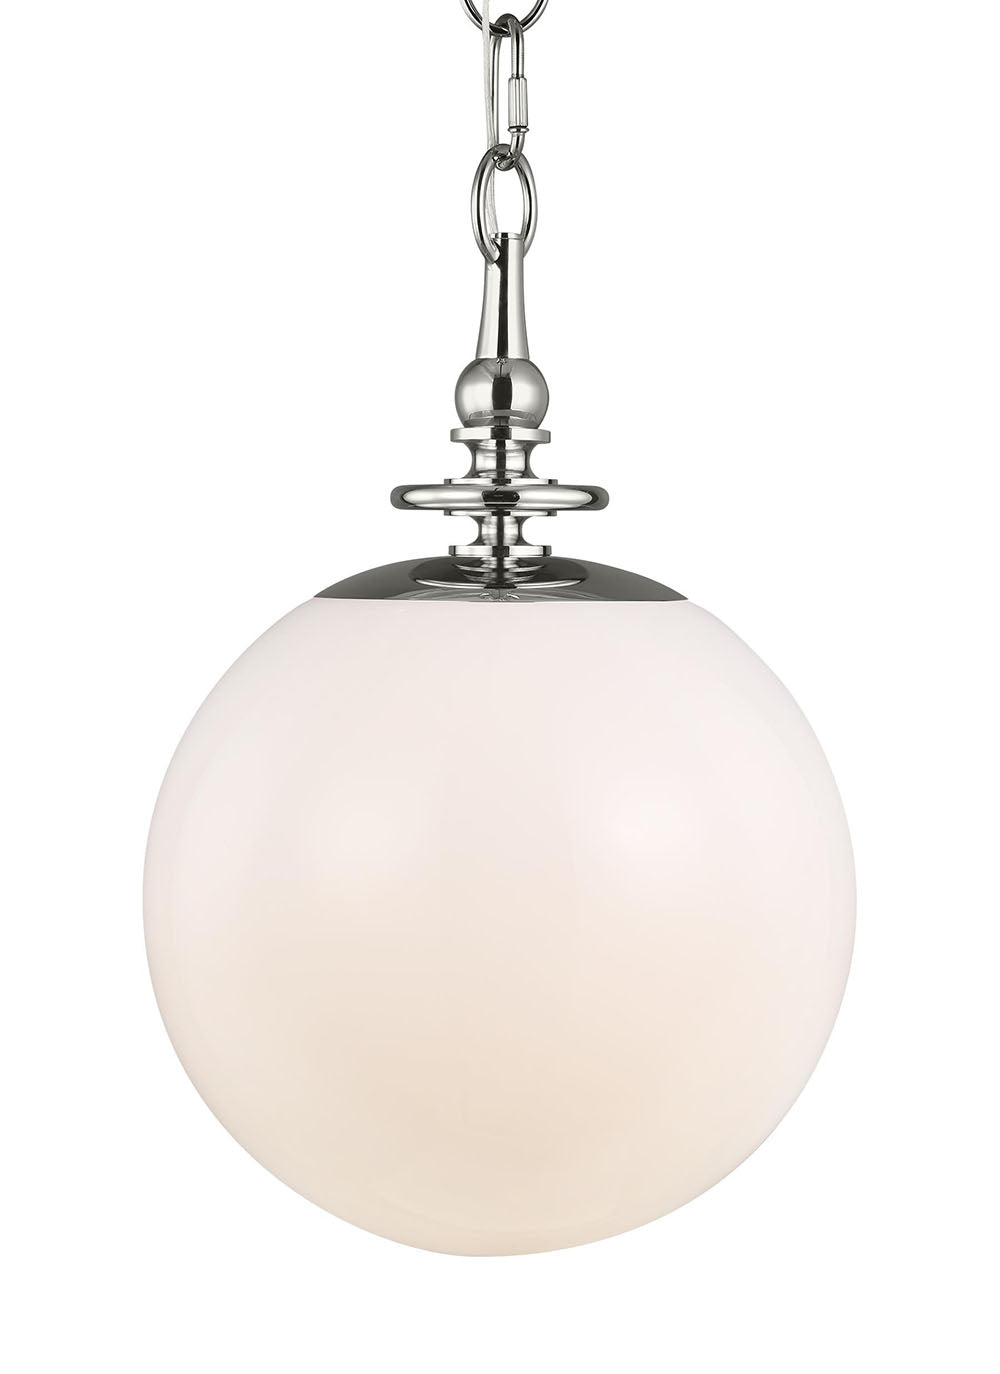 Bathroom pendant with a white glass globe and polished nickel finish.